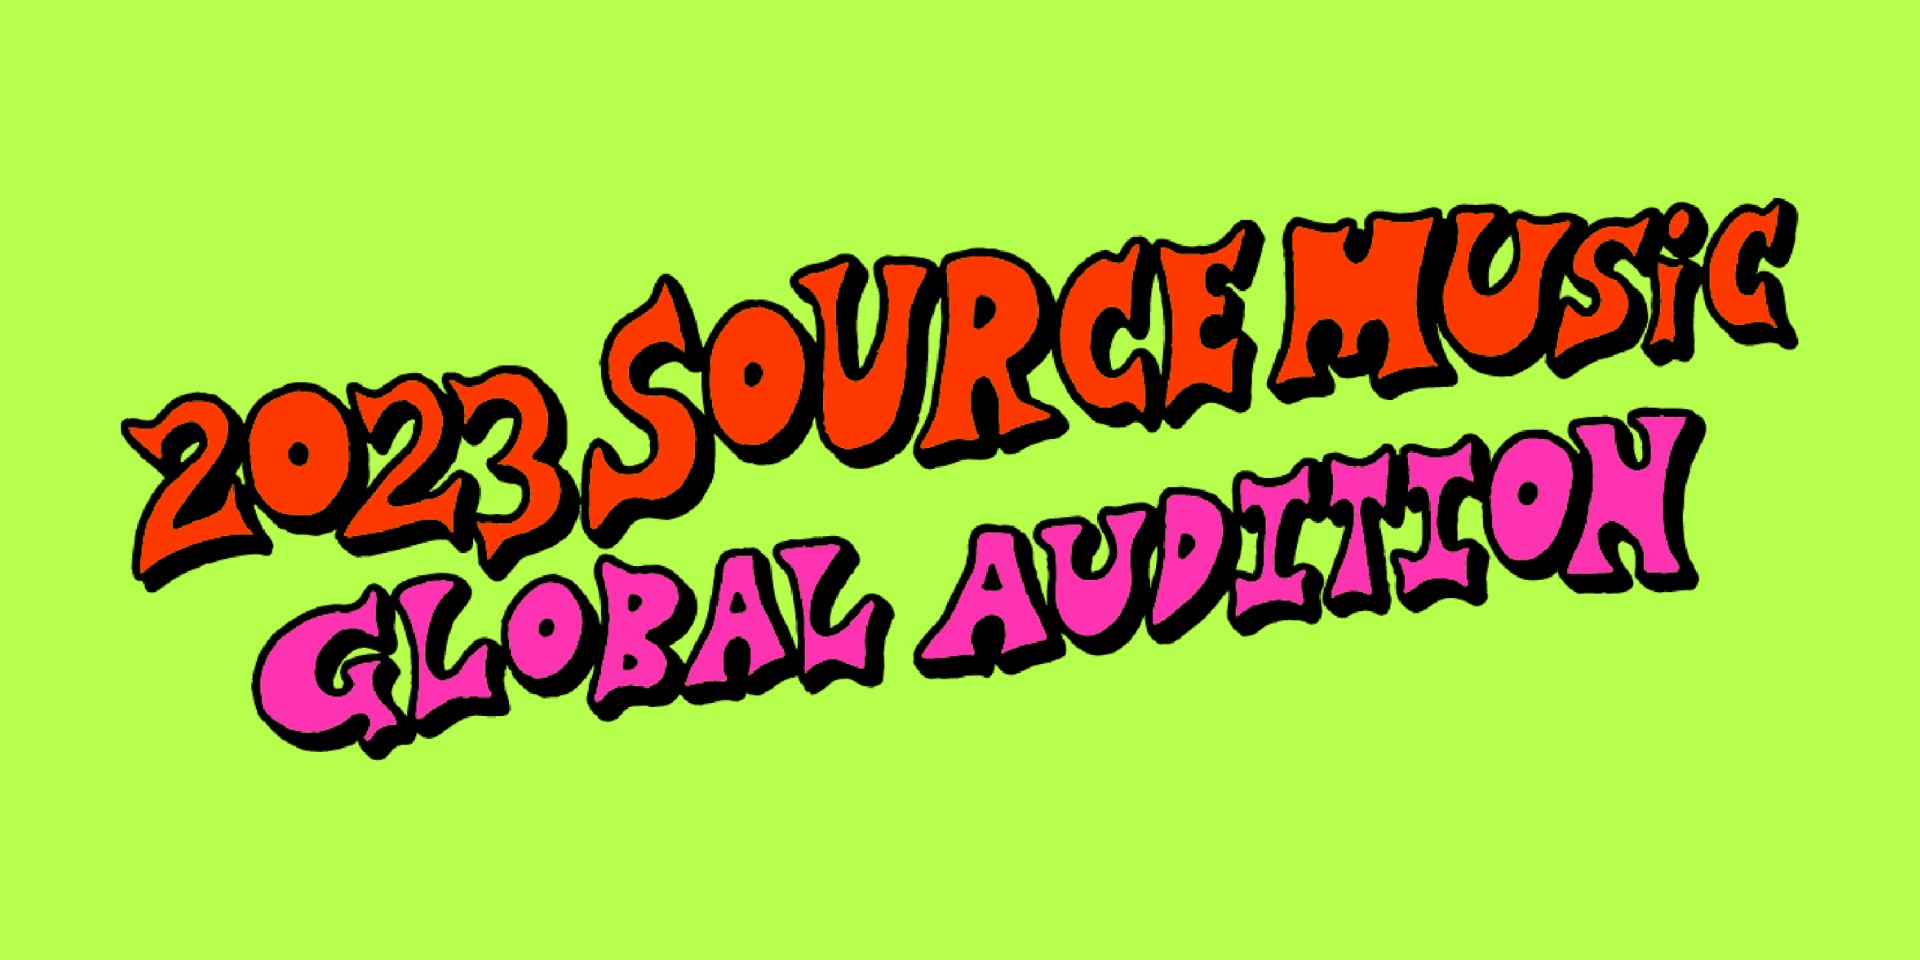 HYBE's SOURCE MUSIC aims to make girl group dreams come true with 2023 SOURCE MUSIC Global Audition